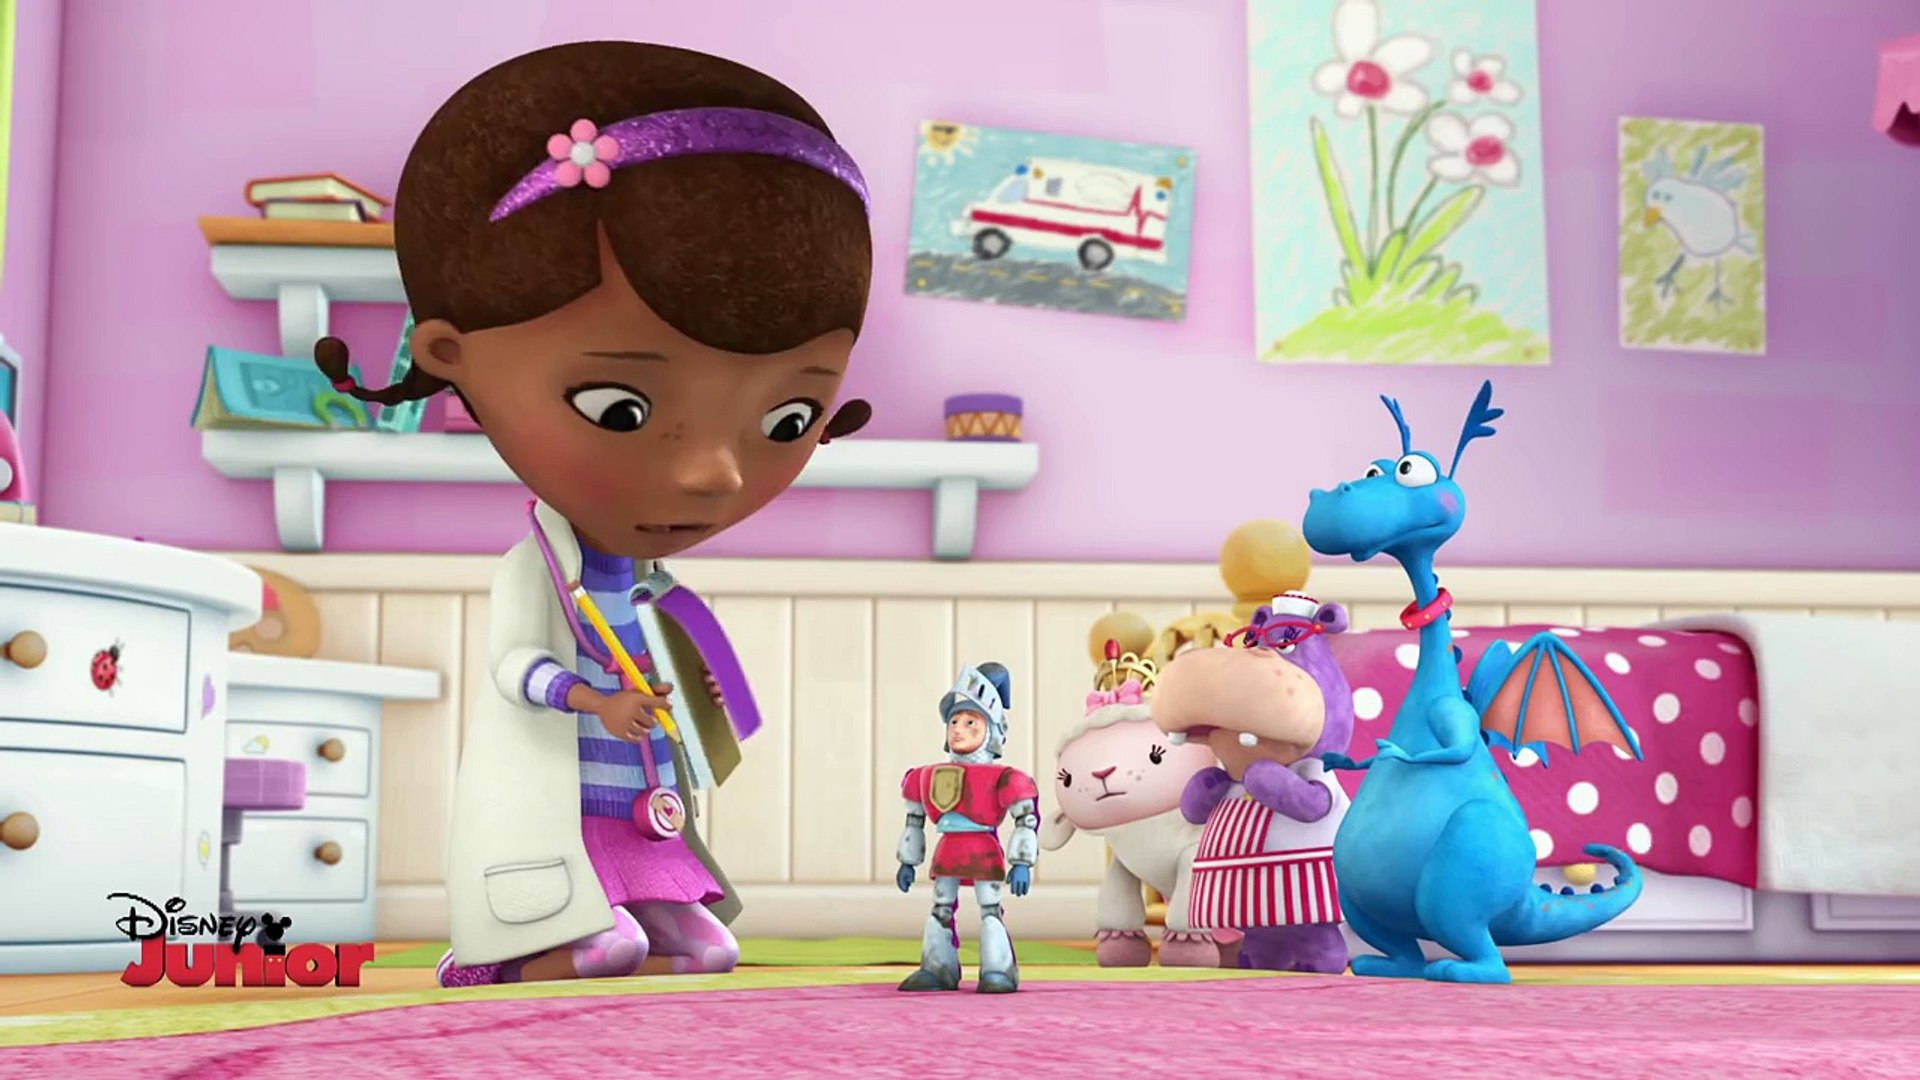 Picture of Doc McStuffins with Sir Kirby in an animated scene Wallpaper